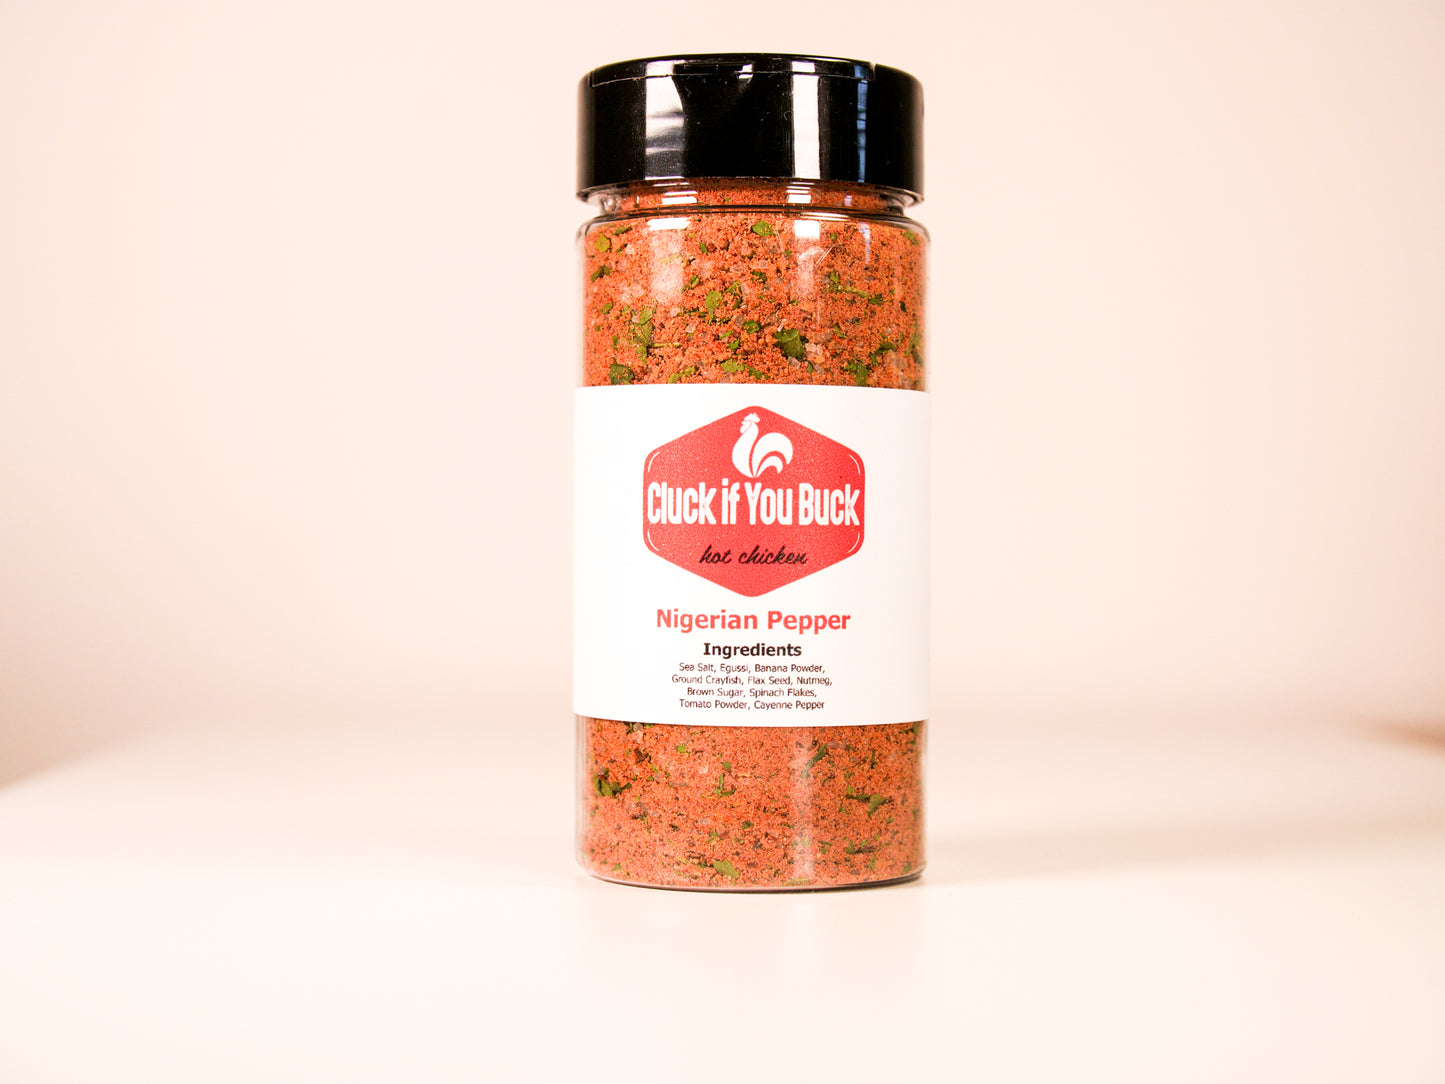 Cluck If You Buck - Nigerian Pepper - Sweet Heat Sea Salt, All-Purpose Chicken, Rib, Brisket, Greens, Tofu, Pork BBQ Rubs and Spices for Frying, Smoking and Grilling - No MSG, Gluten Free